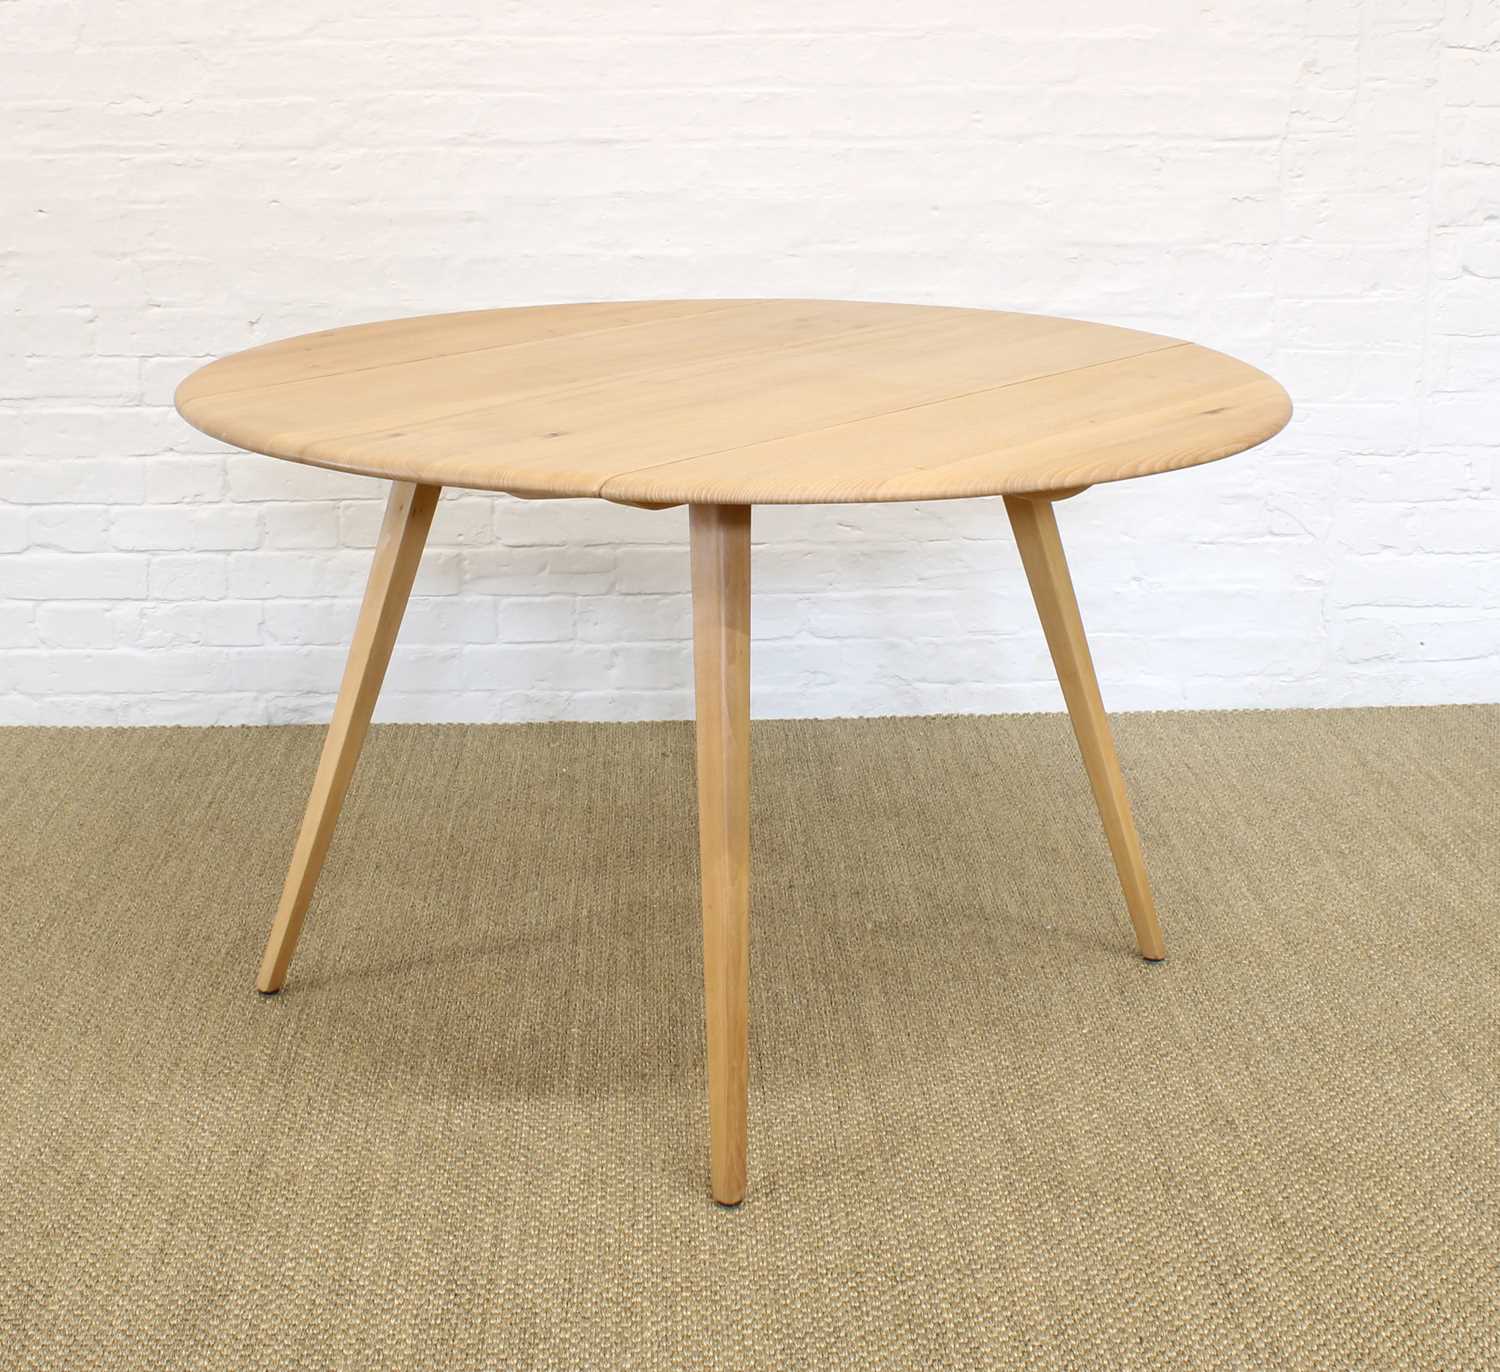 Lucian Ercolani for Ercol Model 384 "Windsor" Drop-Leaf Dining Table - Image 4 of 12